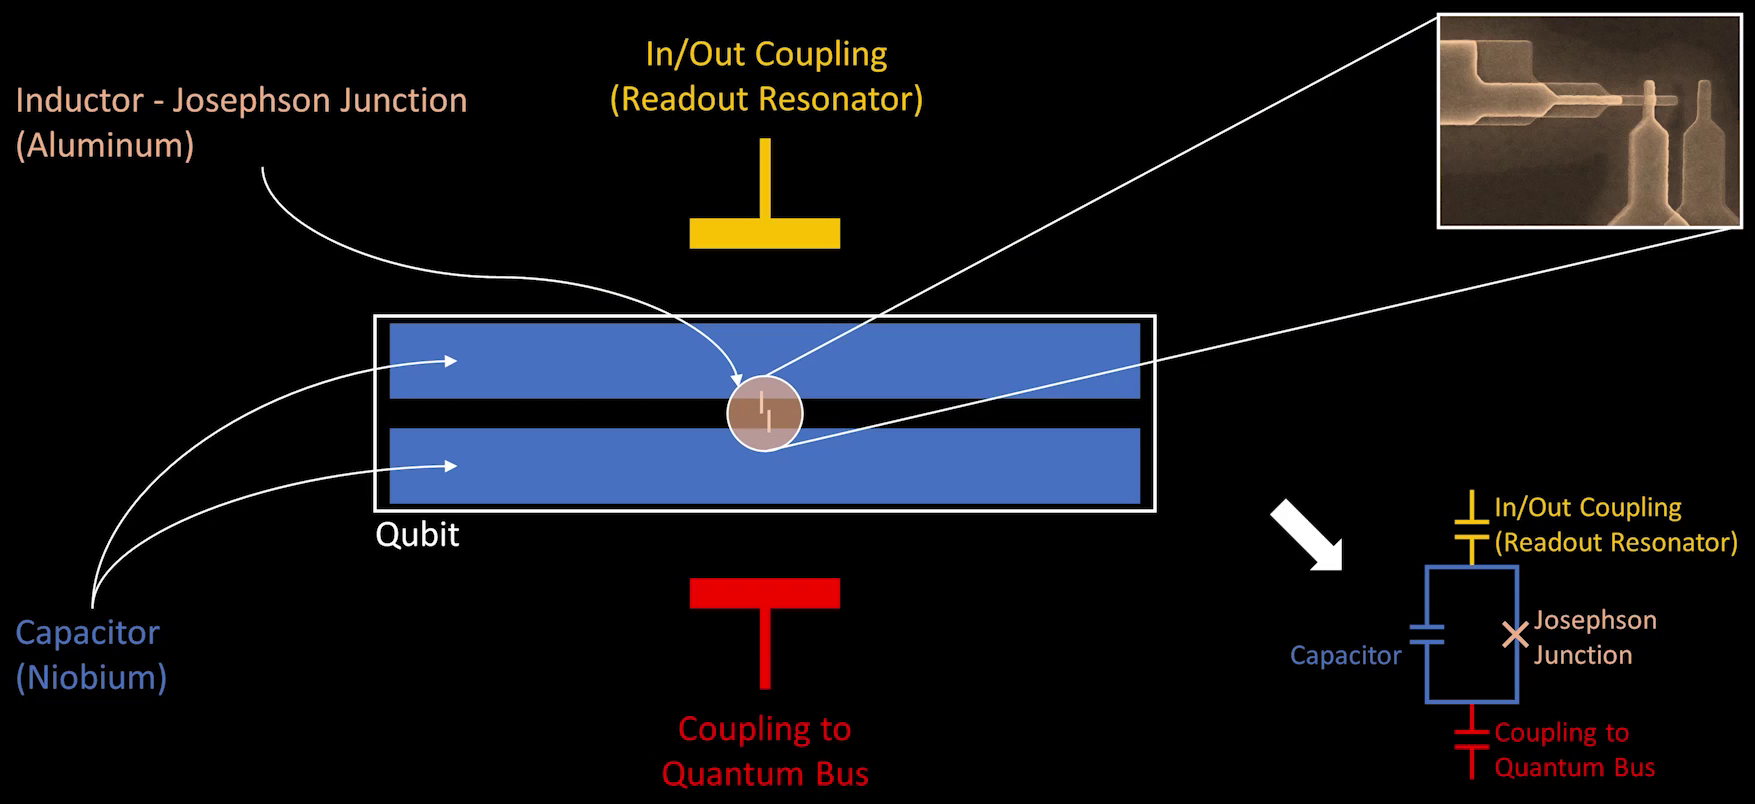 A schematic close-up of IBM’s superconducting qubit, including a zoomed-in view of its Josephson junction. Source: IBM Research. (Click image to enlarge.)